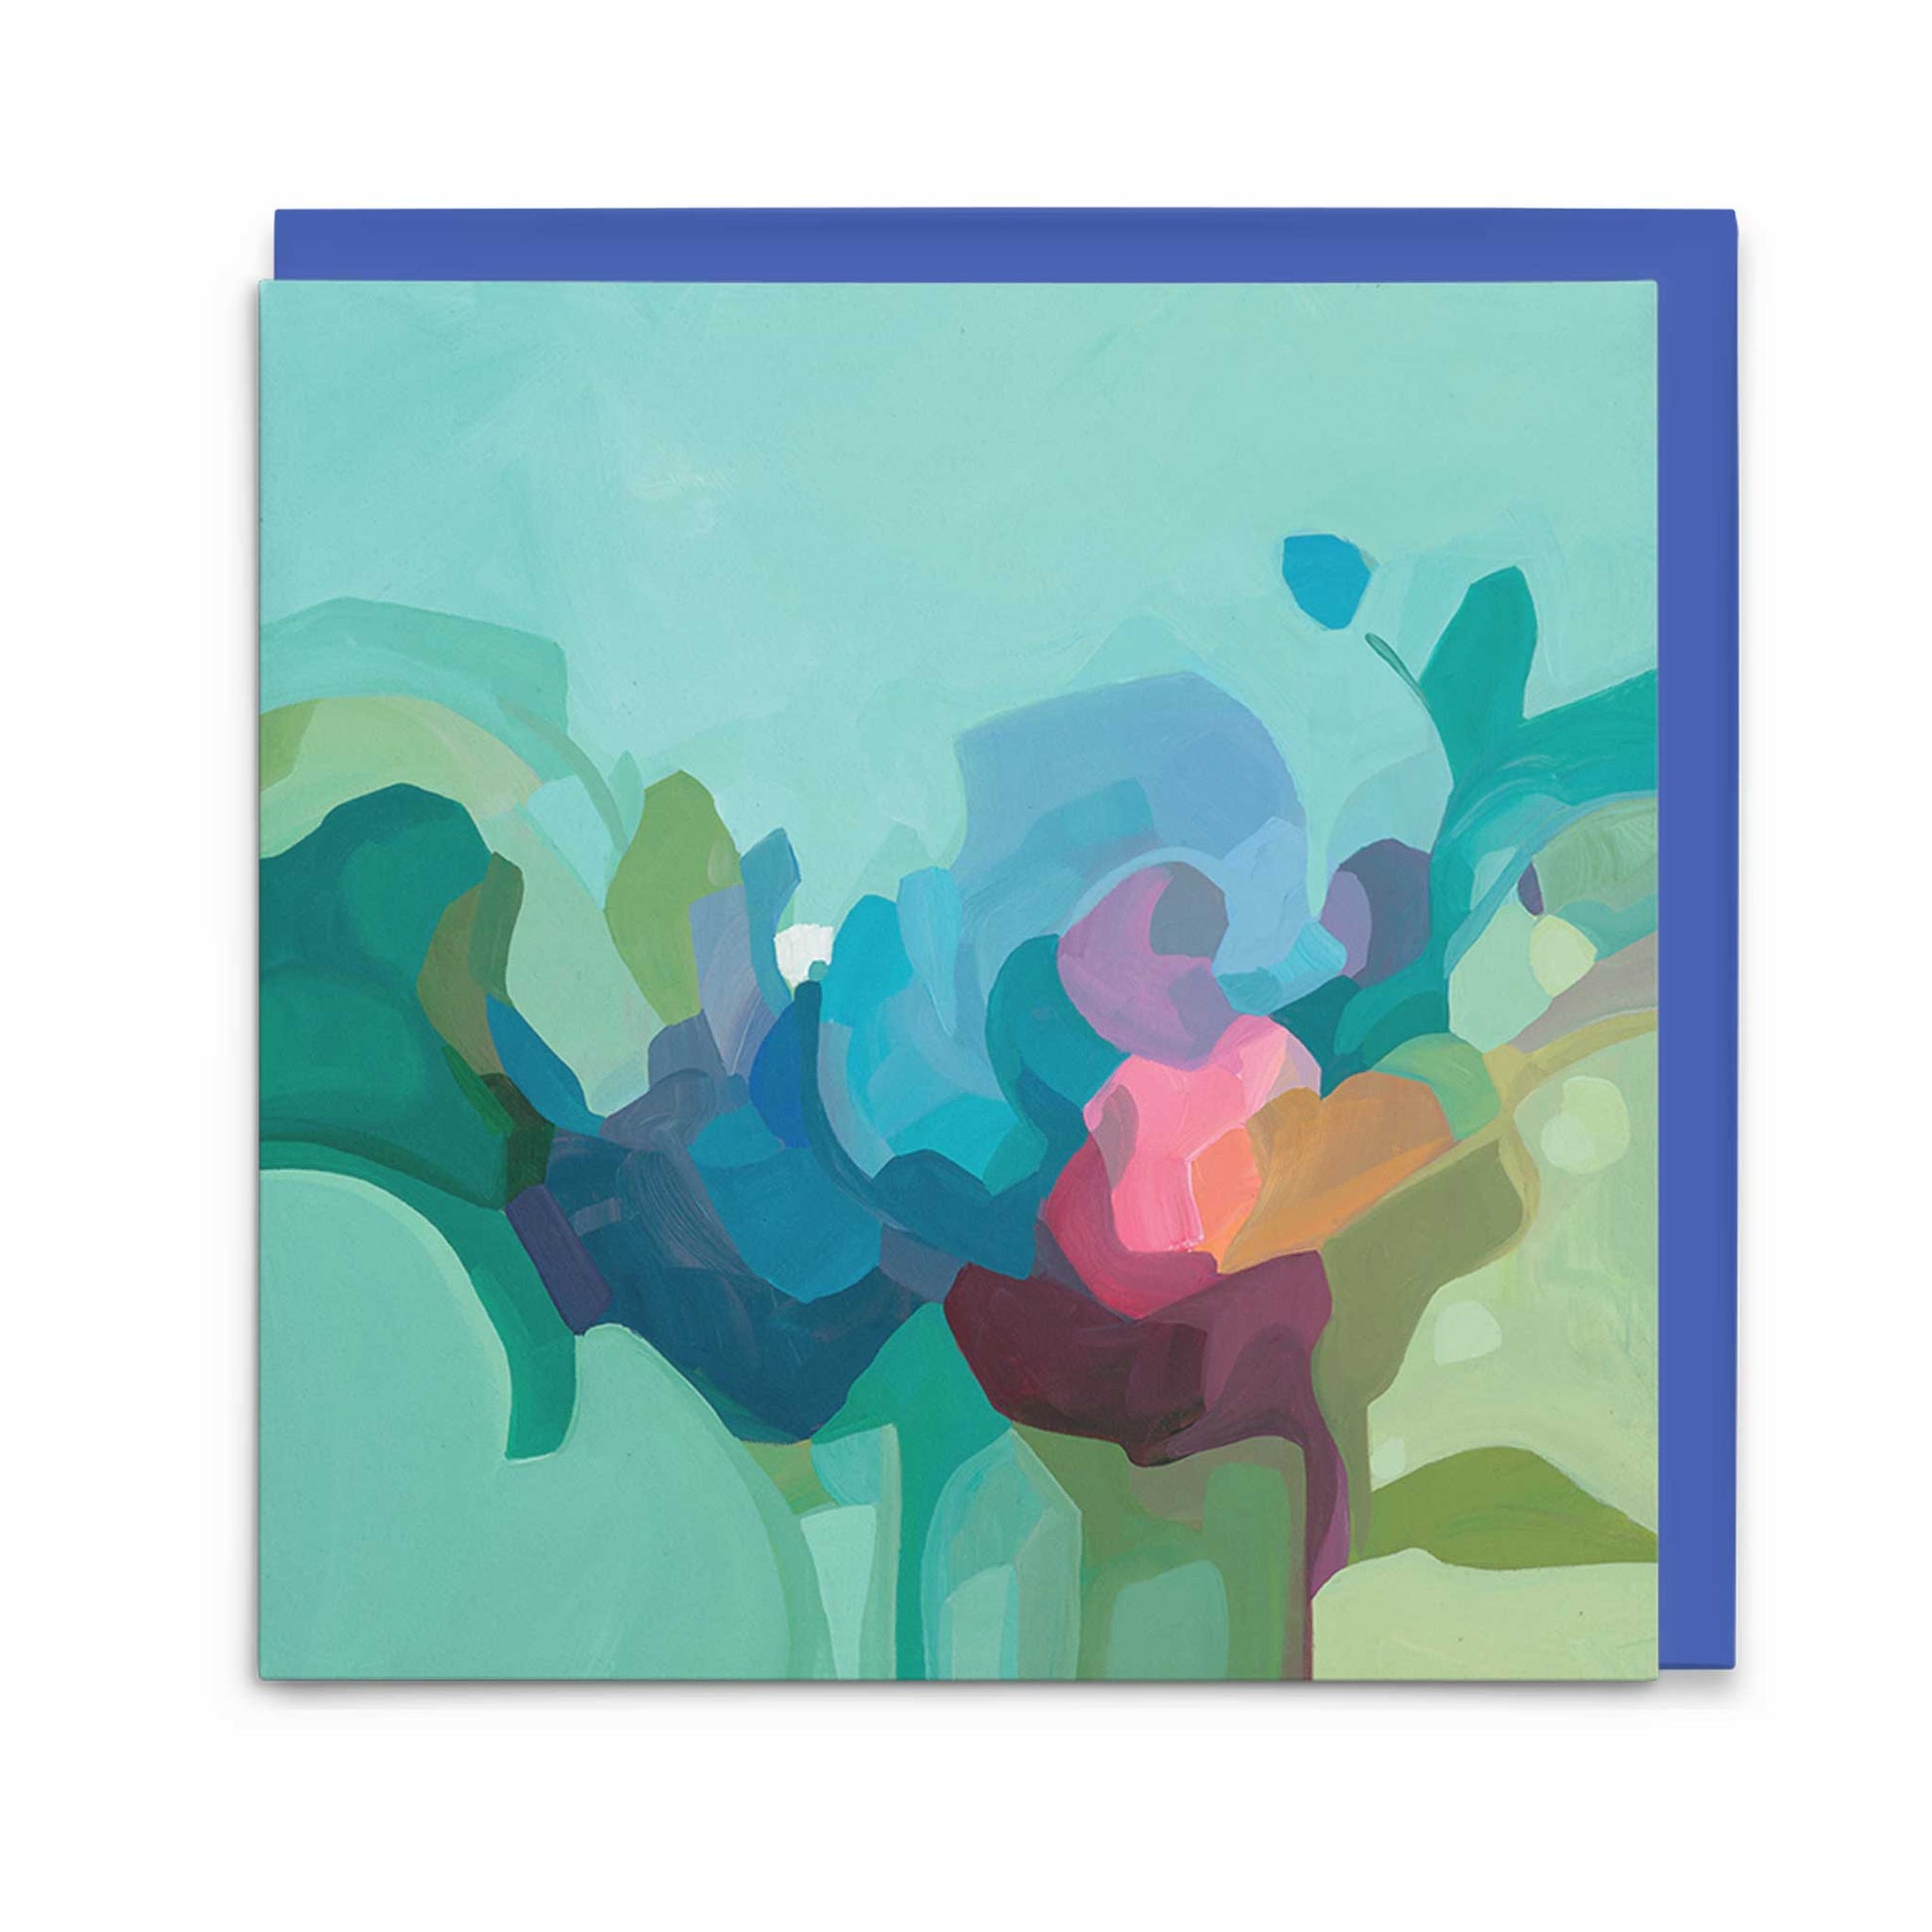 mint green abstract art greeting card with blue envelope